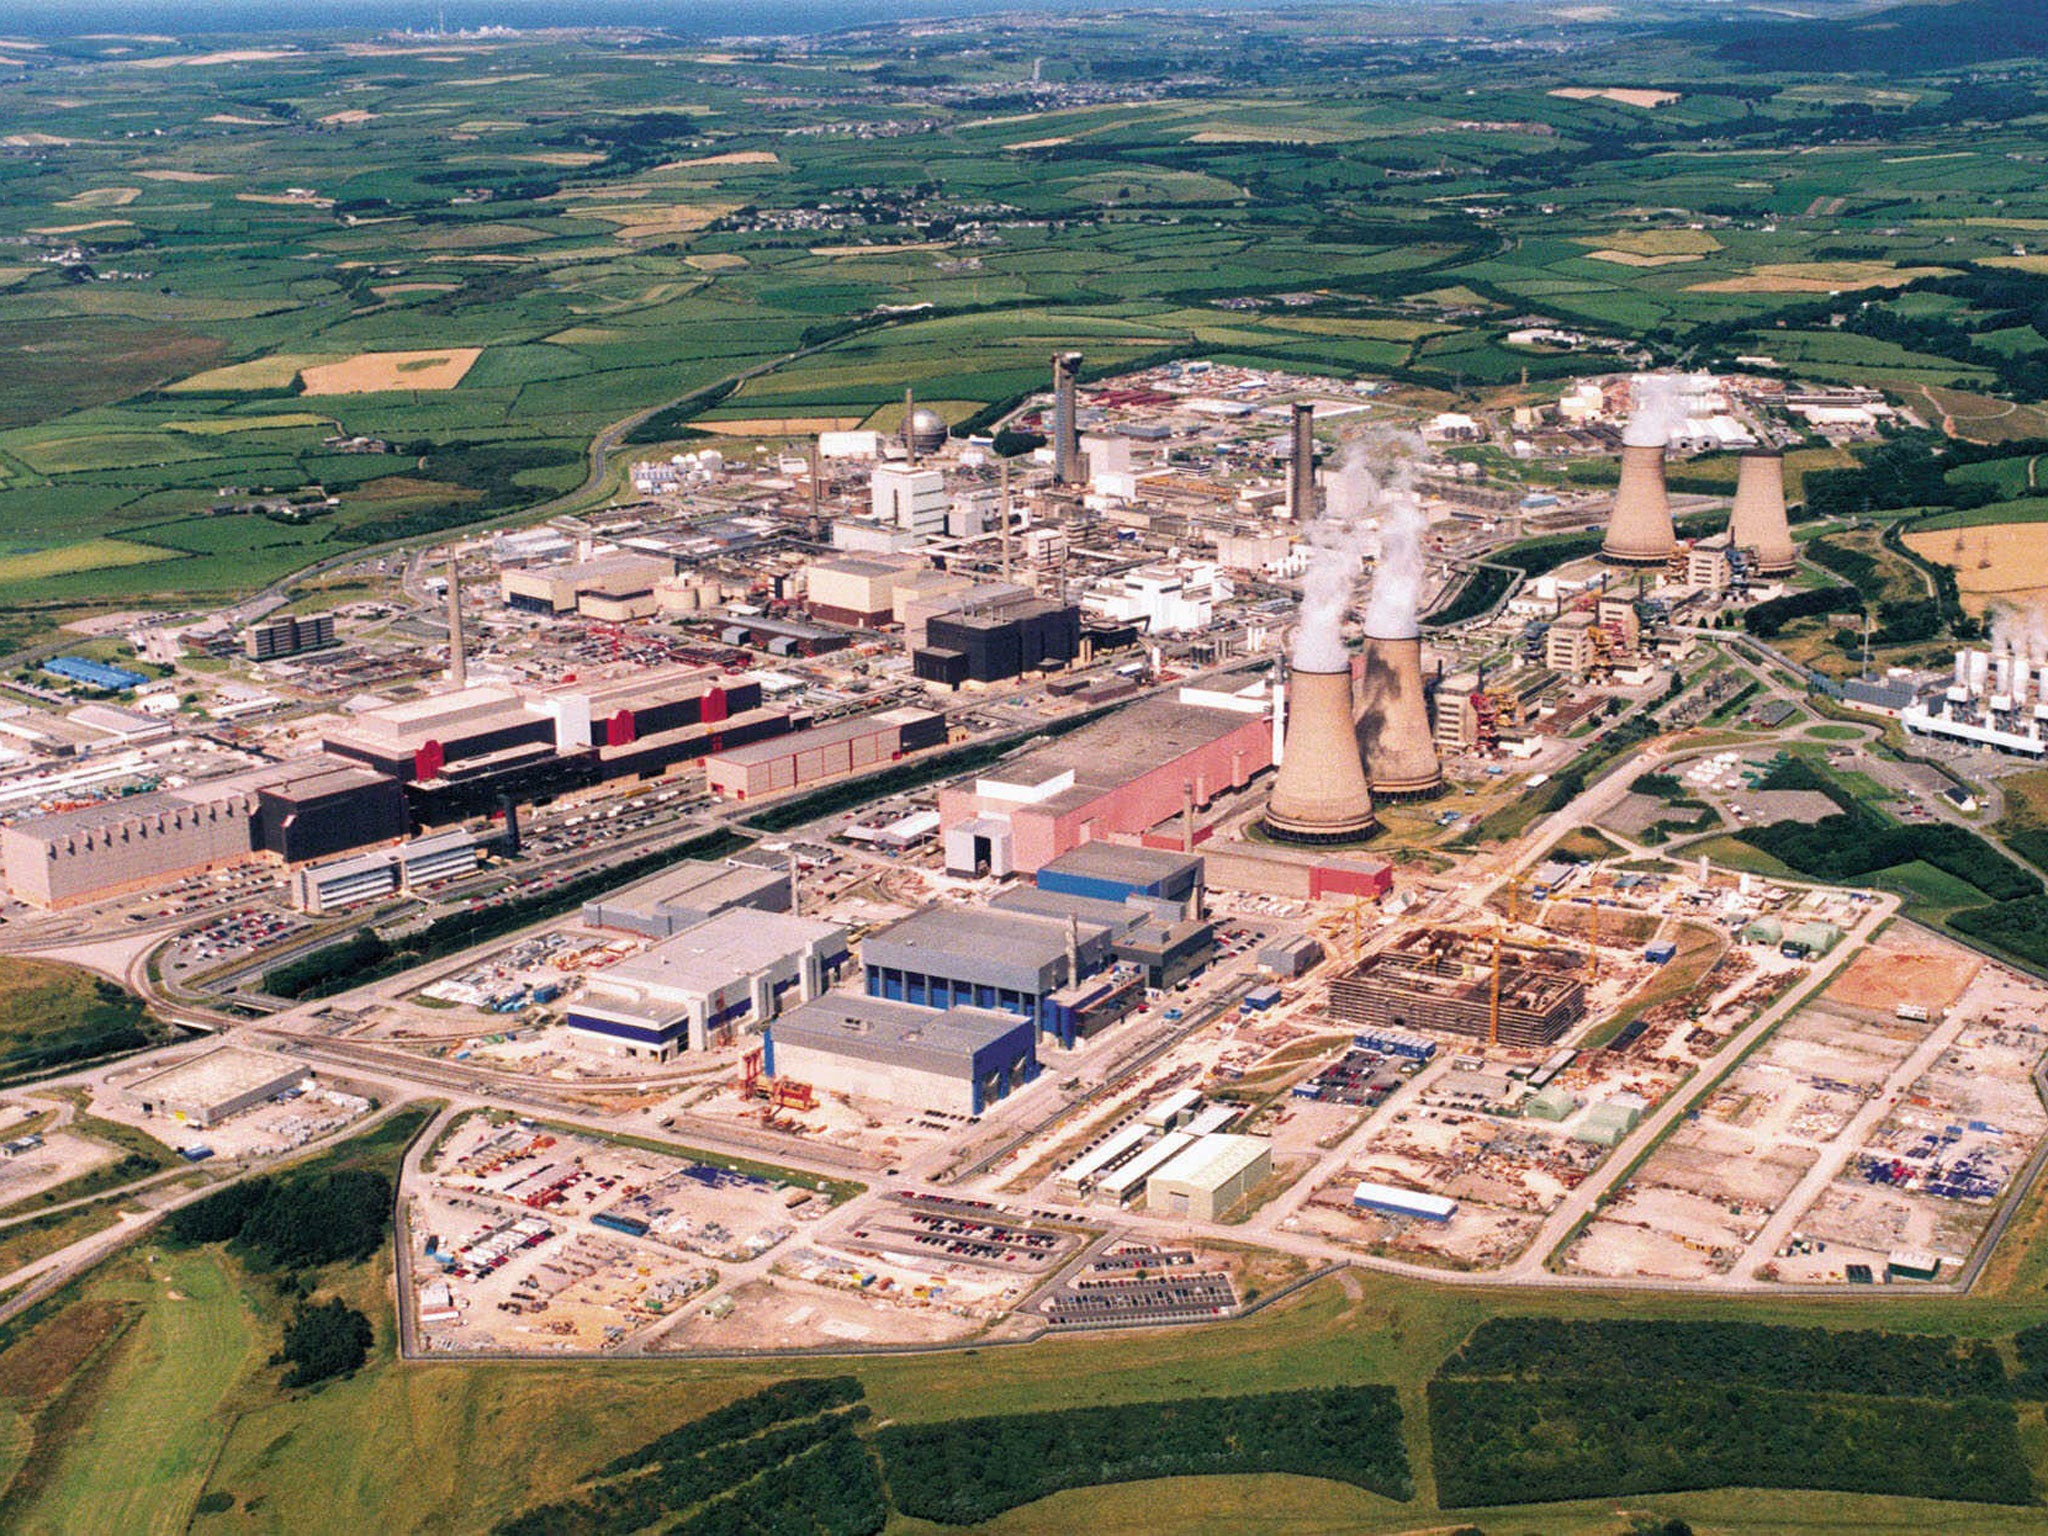 The CNC recently stepped up the number of officers guarding the Sellafield plant in Cumbria